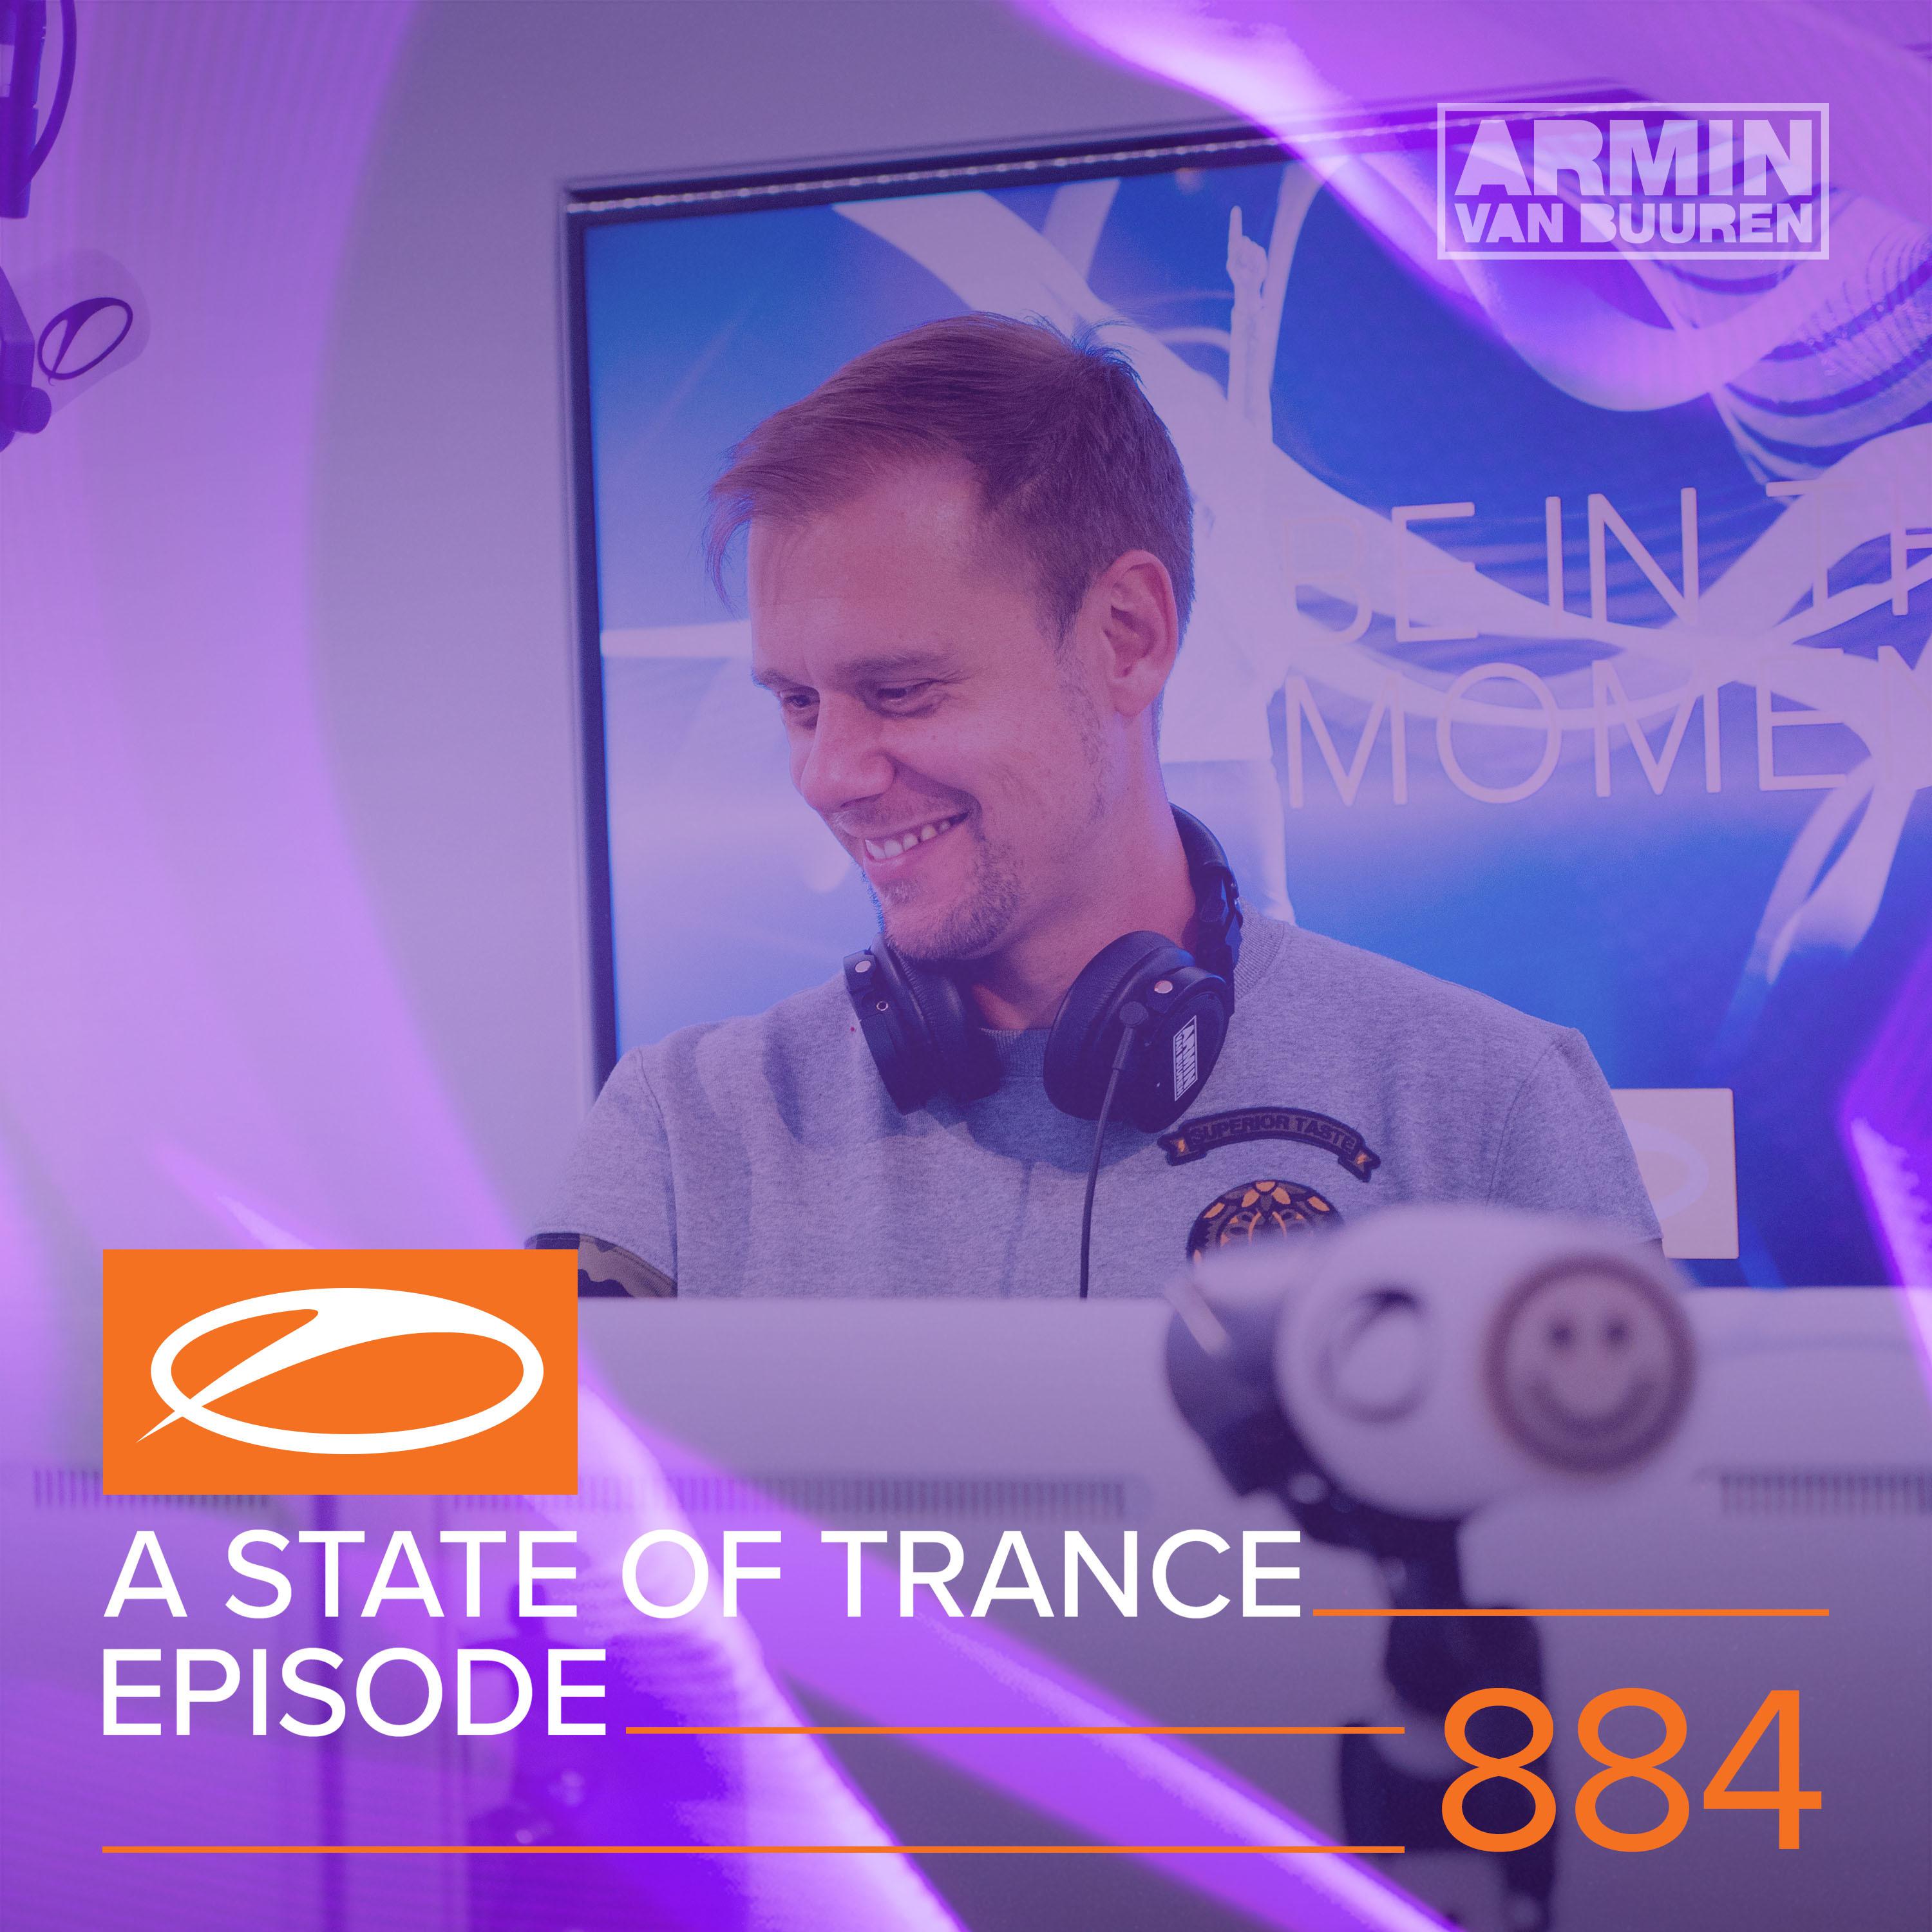 A State Of Trance (ASOT 884) (This Week's Service For Dreamers, Pt. 3)